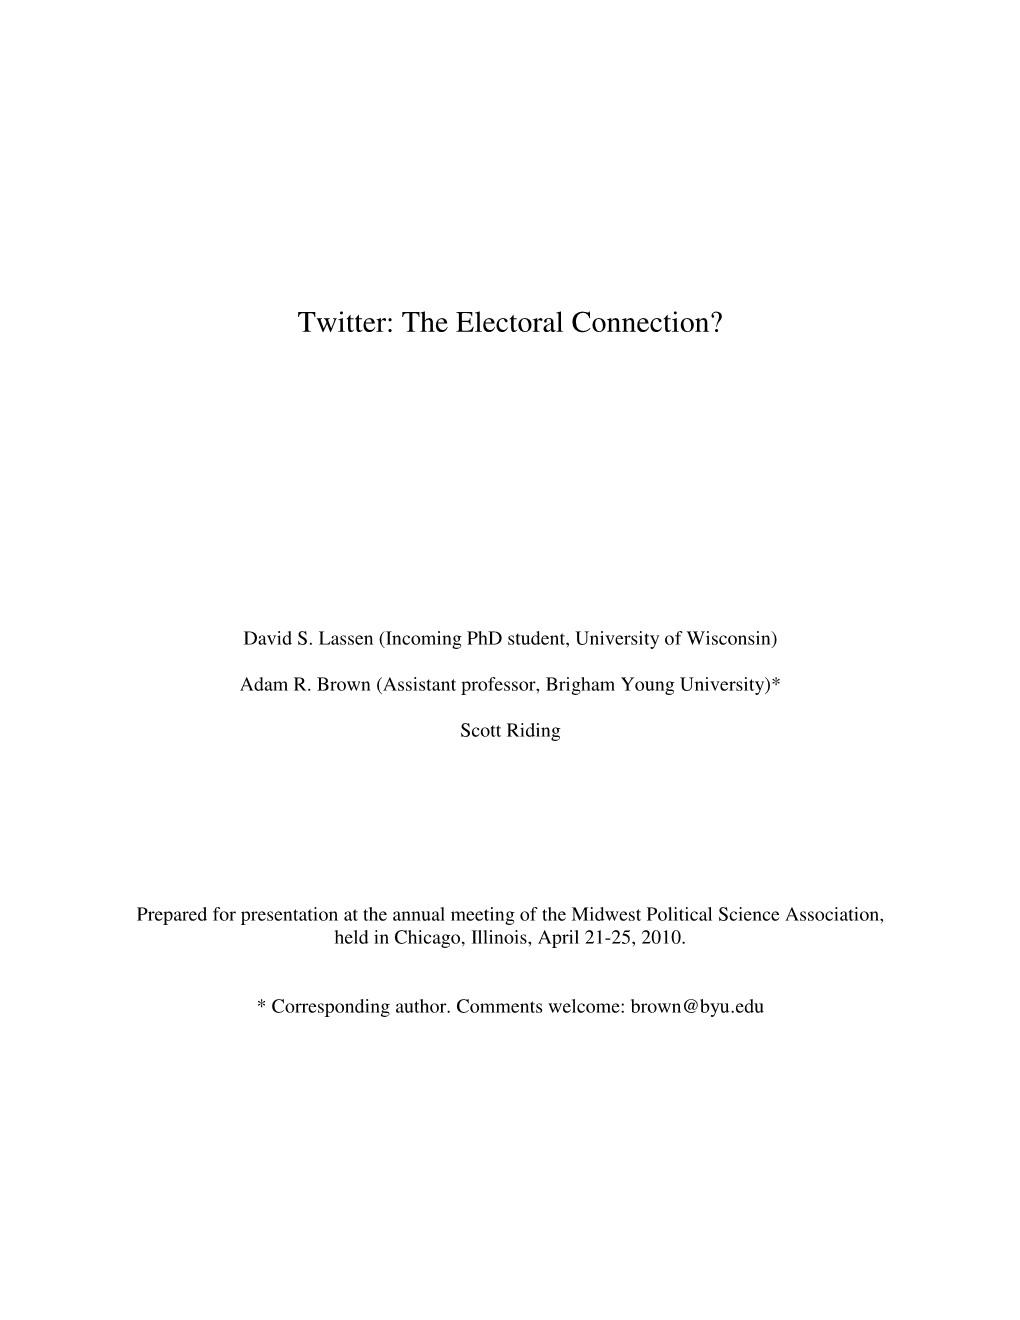 Twitter: the Electoral Connection?